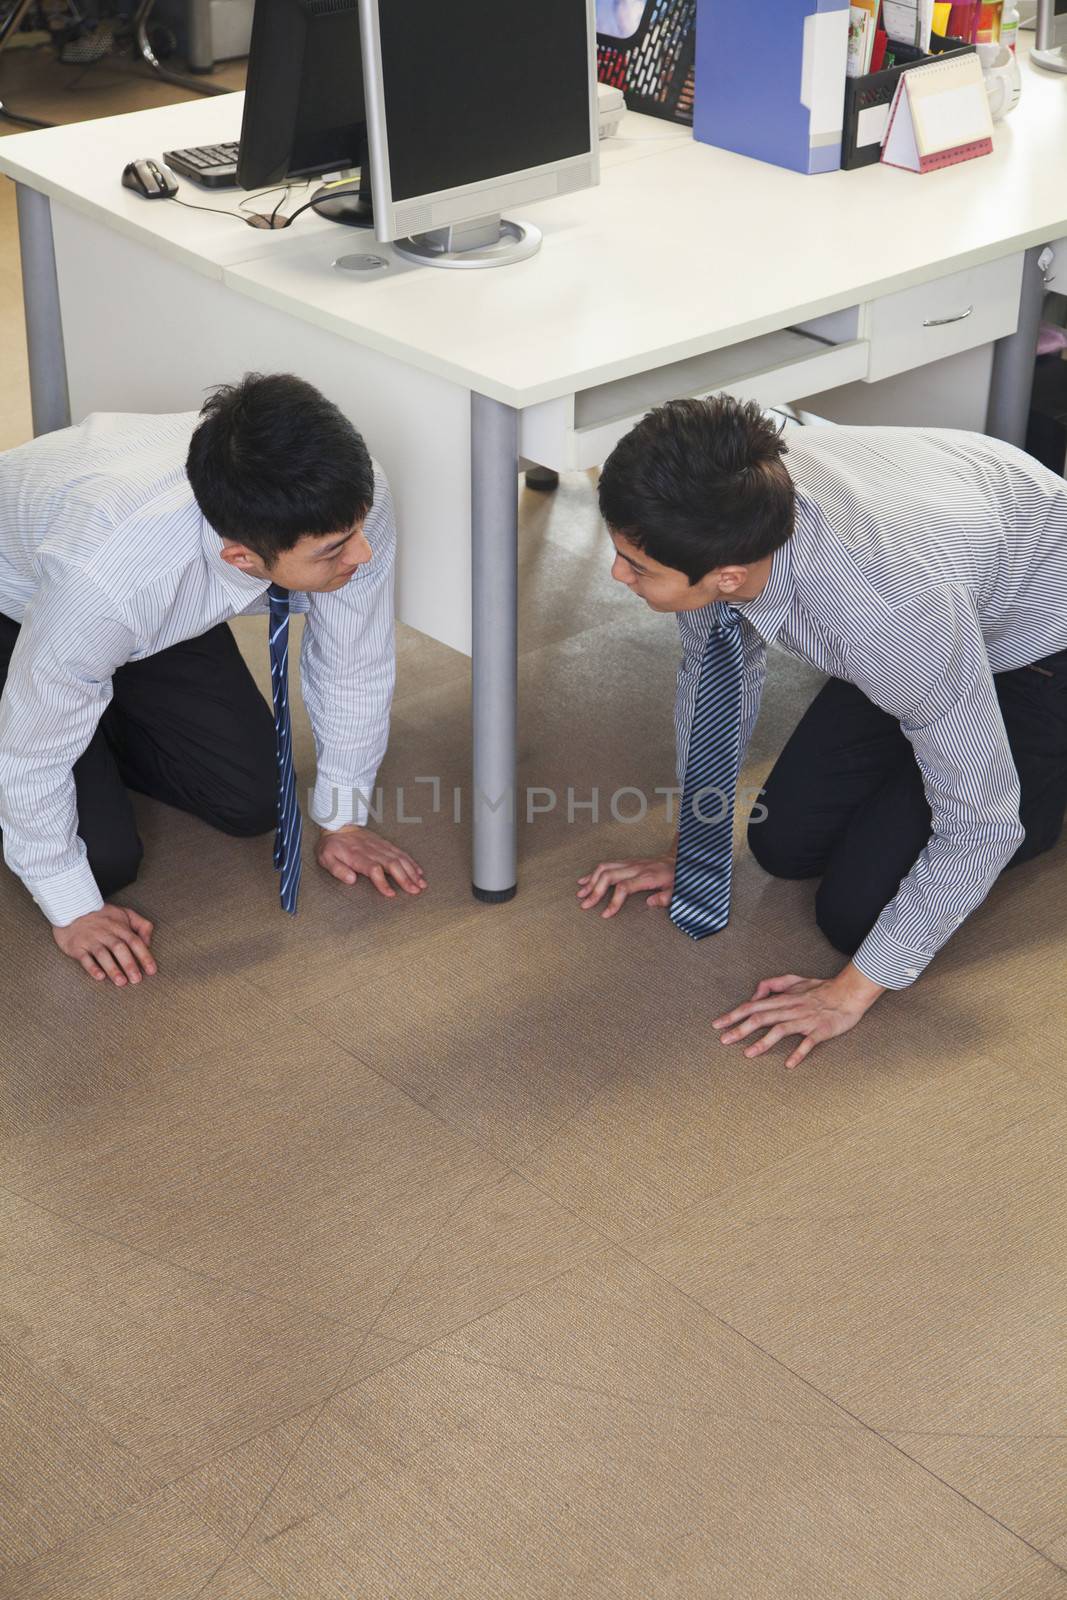 Two businessmen crouching on the floor